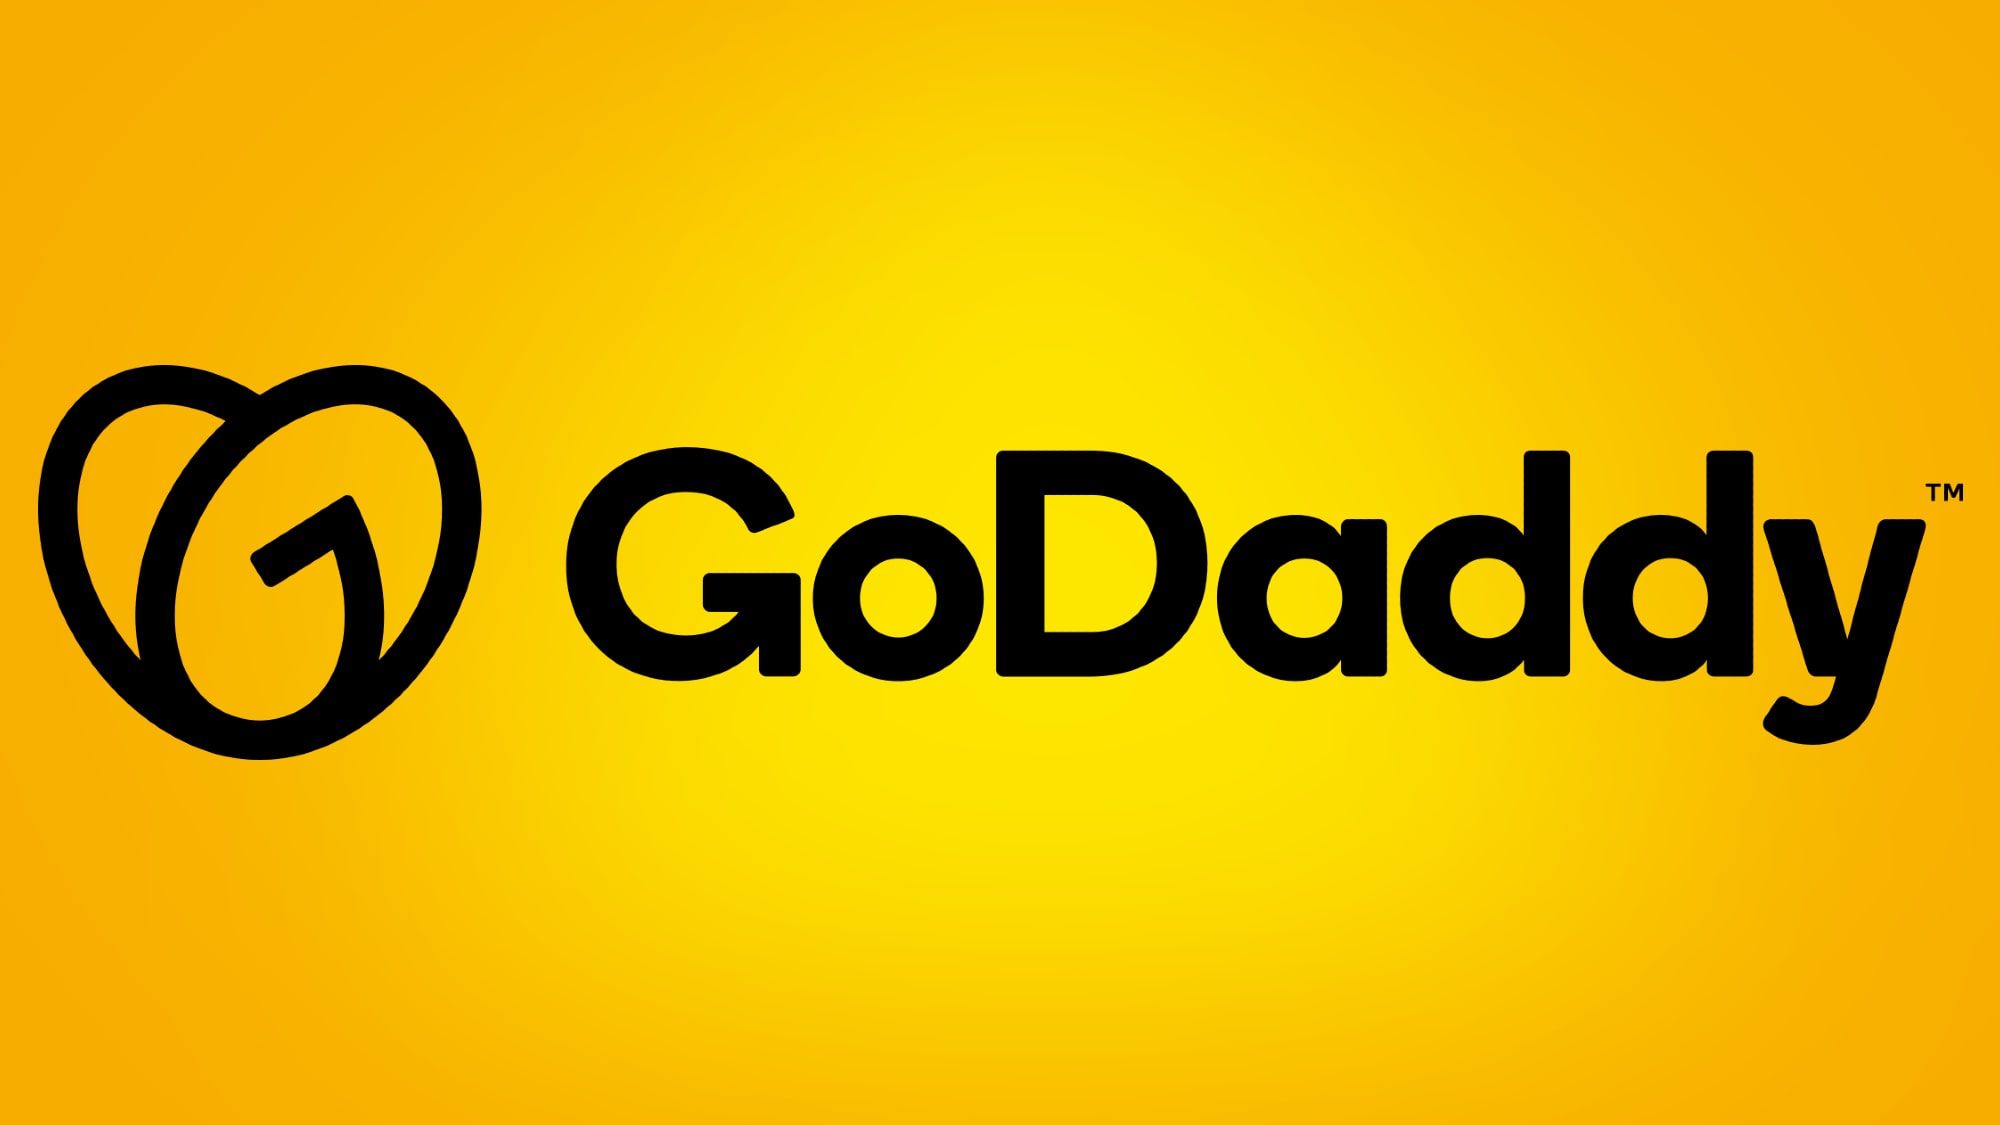 15-astounding-facts-about-godaddy